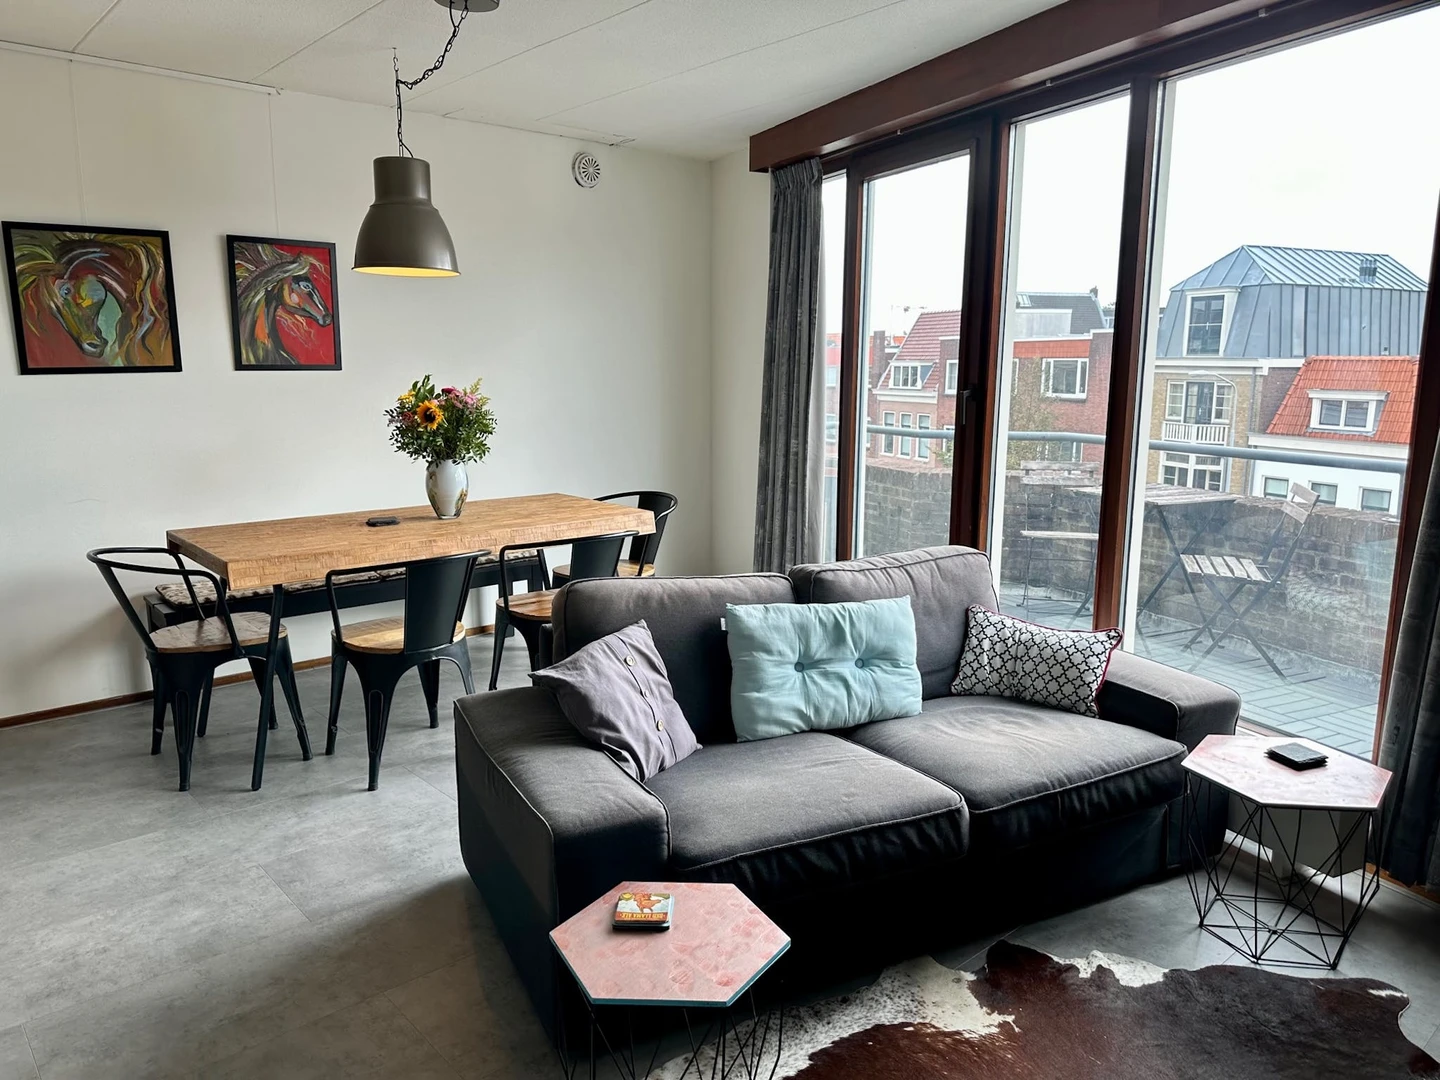 Accommodation in the centre of Haarlem